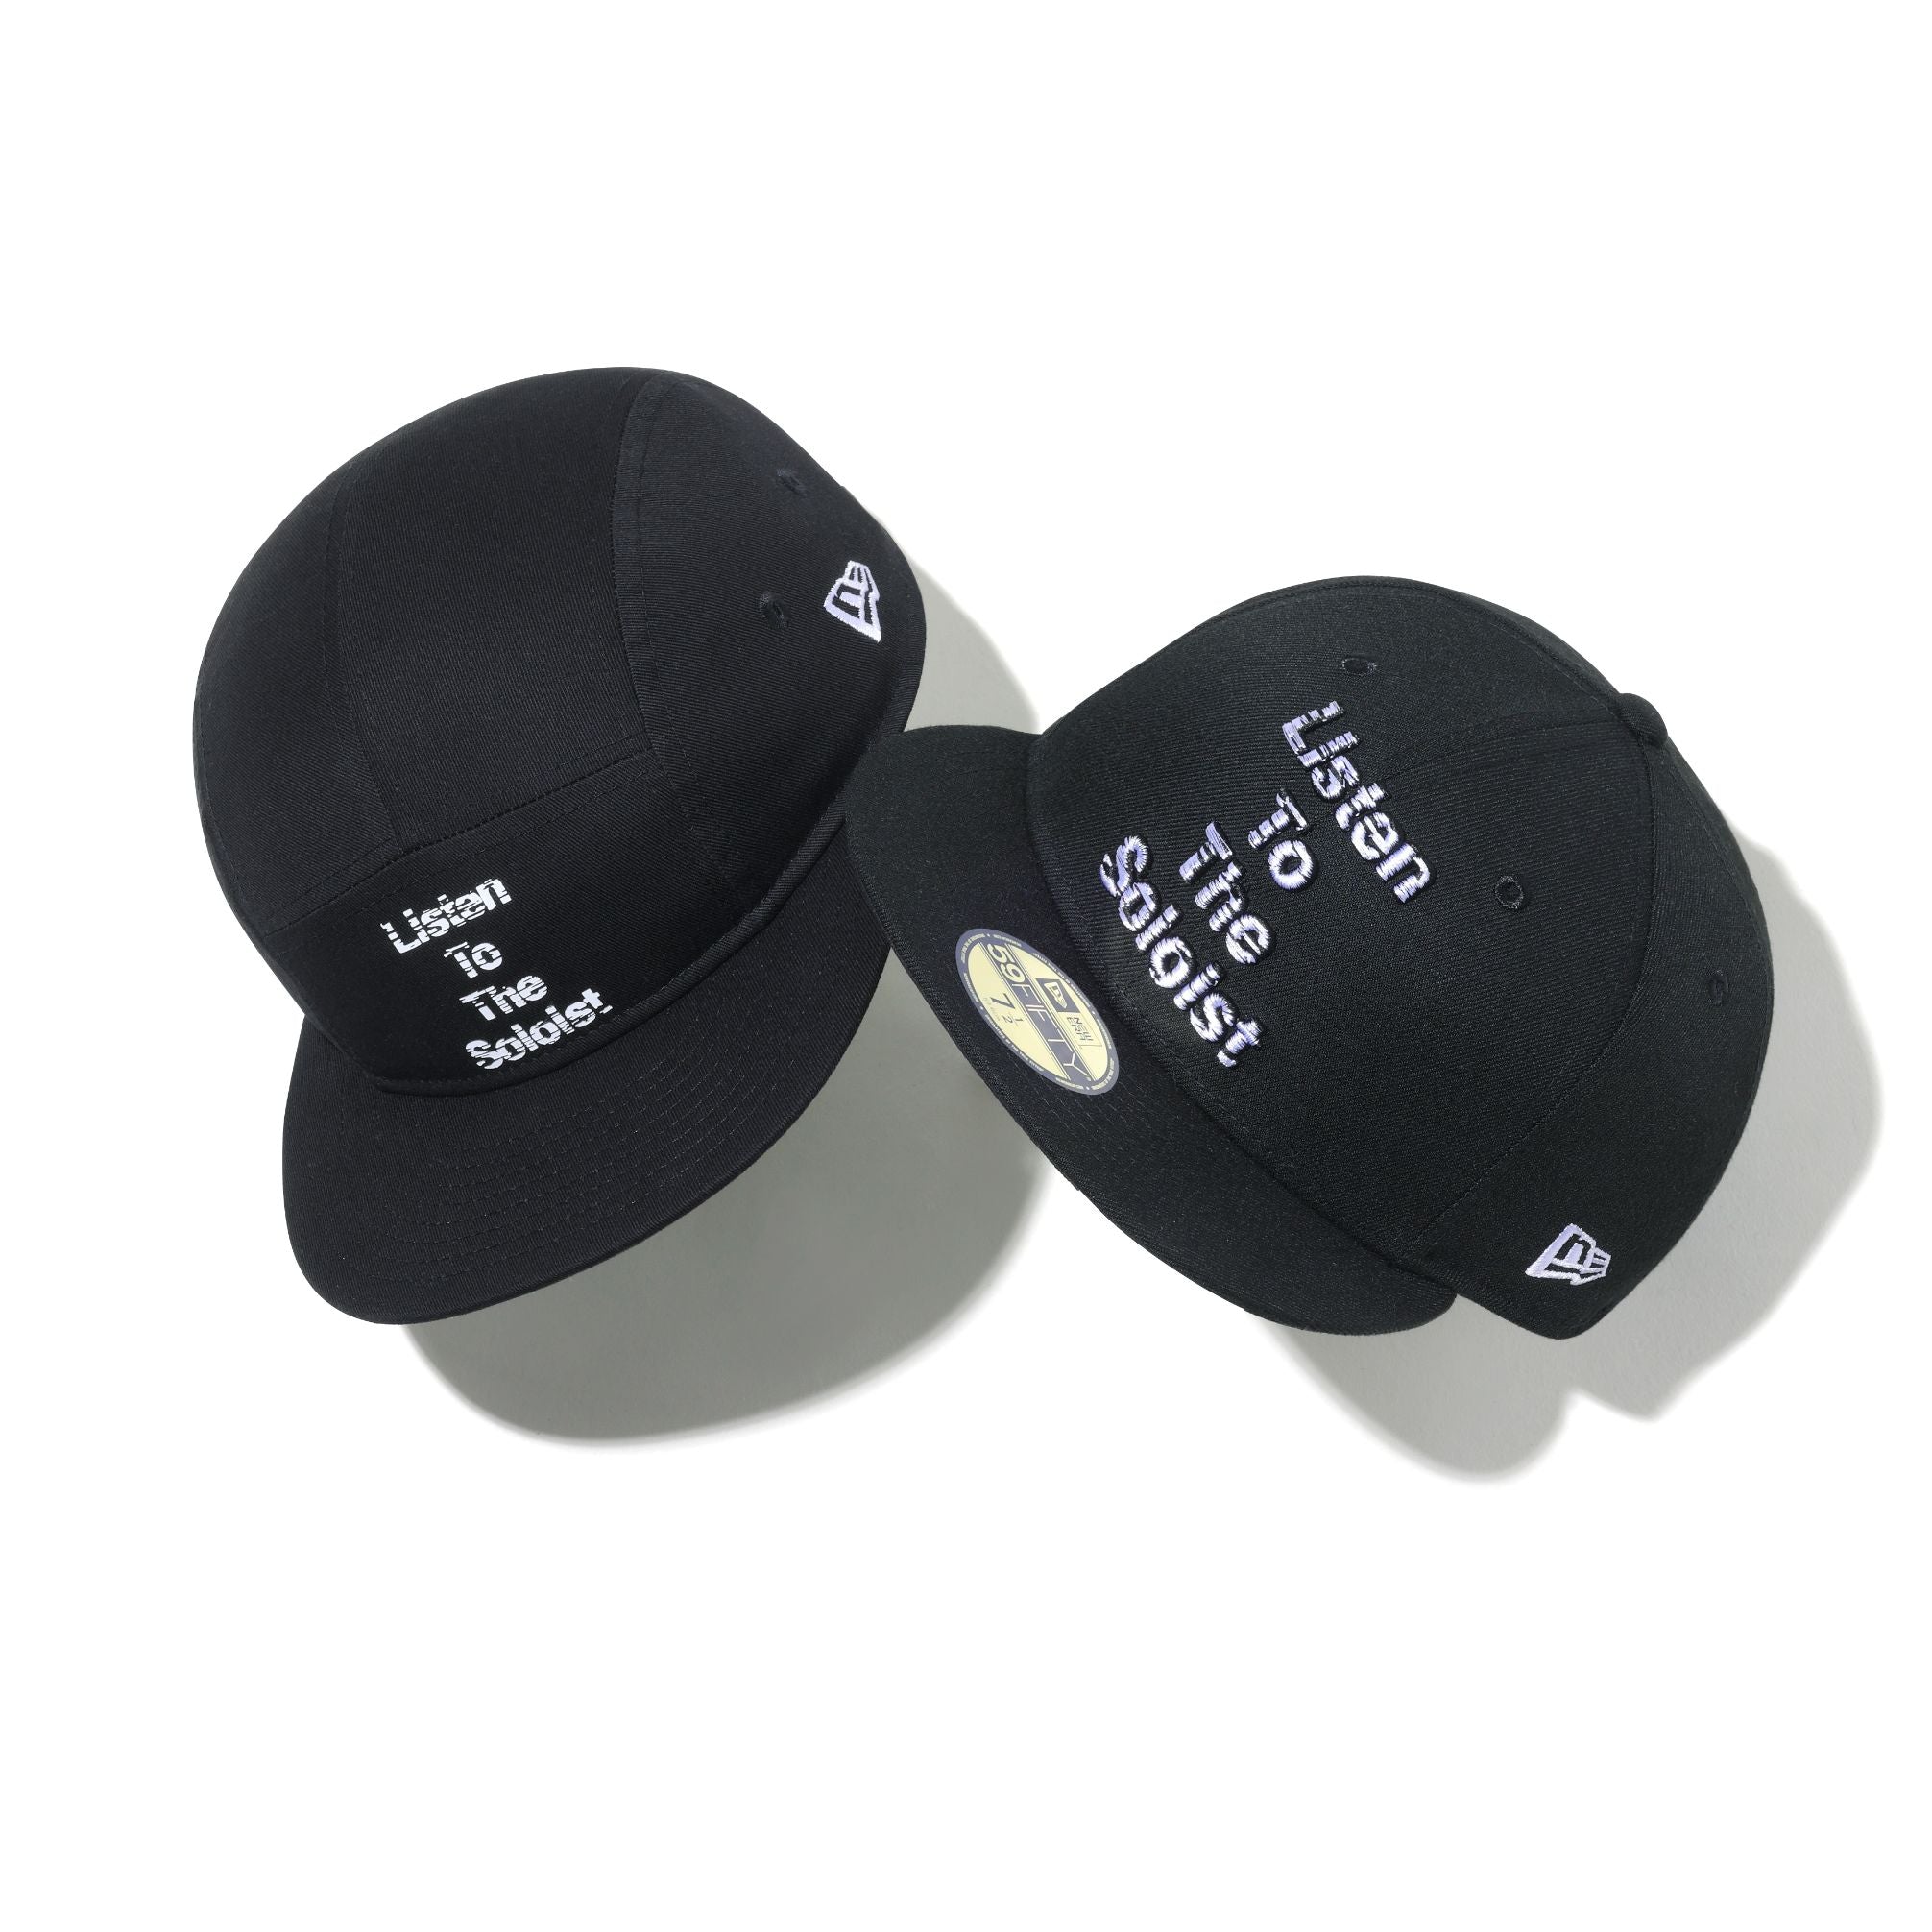 59FIFTY GORE-TEX cap.(Listen To The Soloist.) - snwa.0003-black